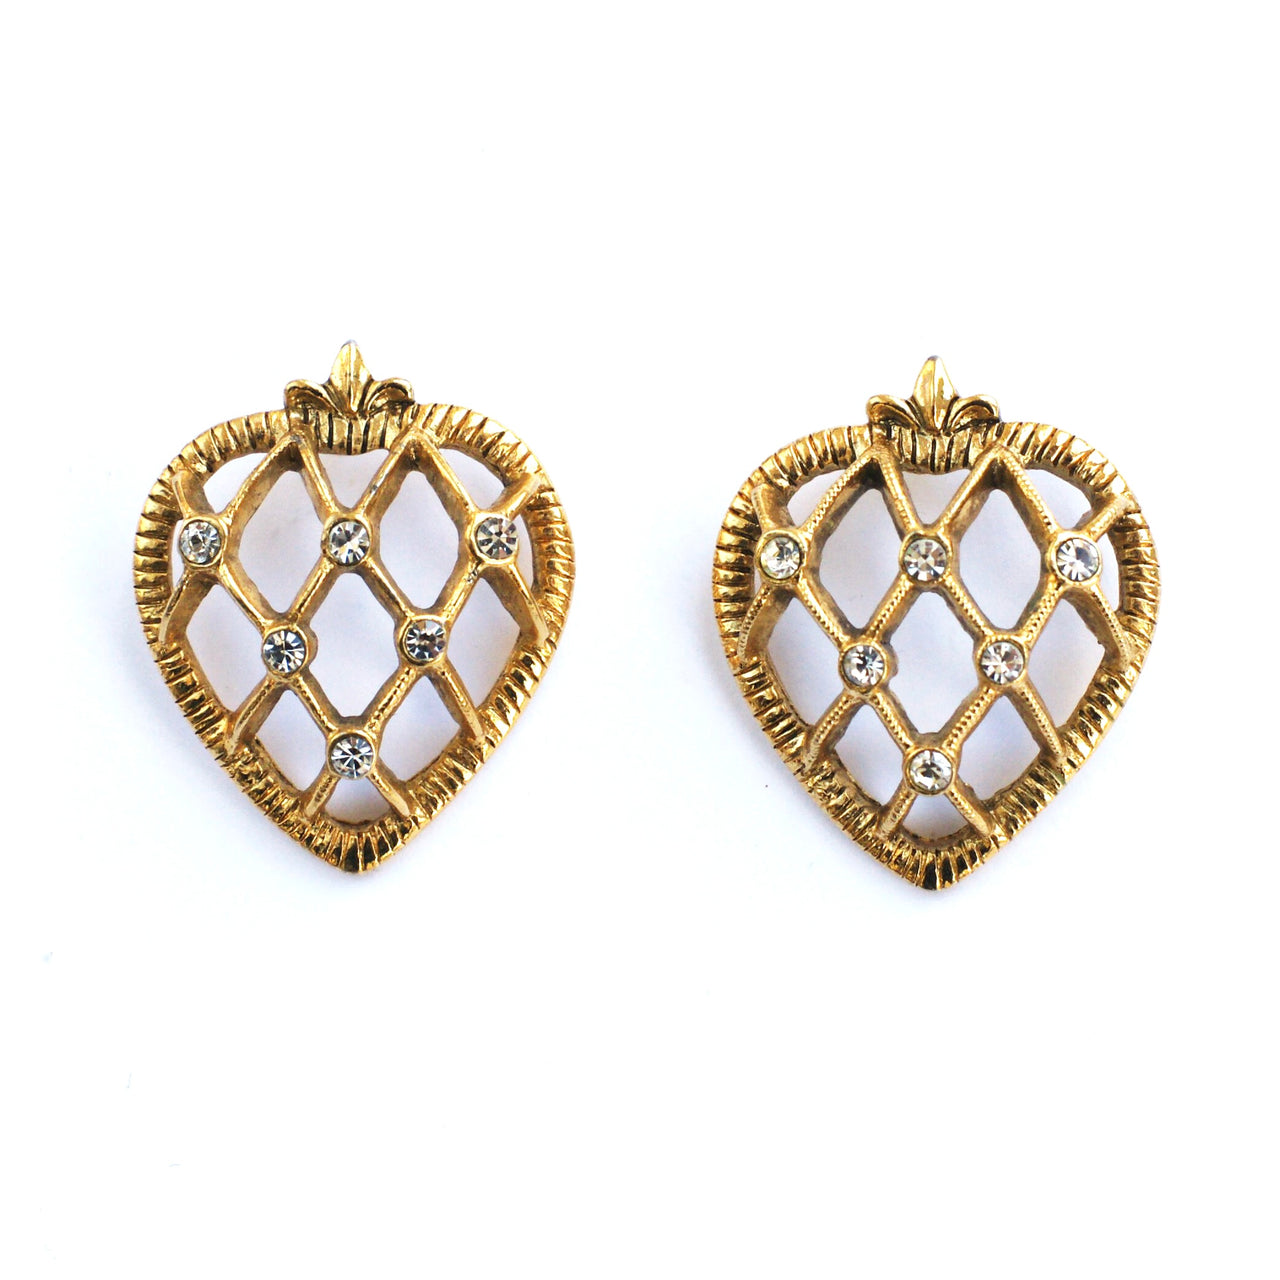 1980s Gold-plated Pierced Strawberry earrings